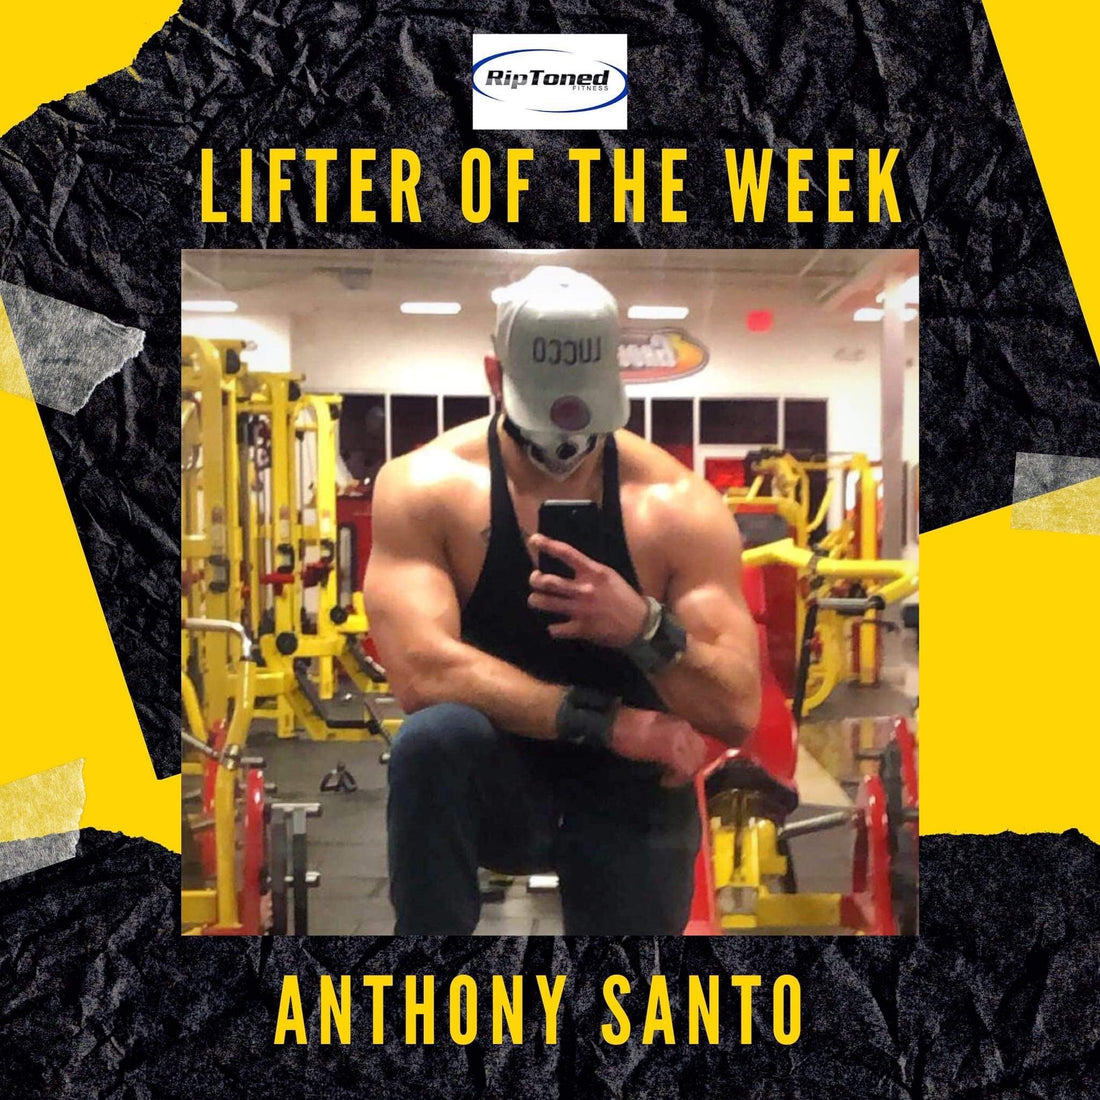 Lifter of the Week - Anthony Santo - Rip Toned